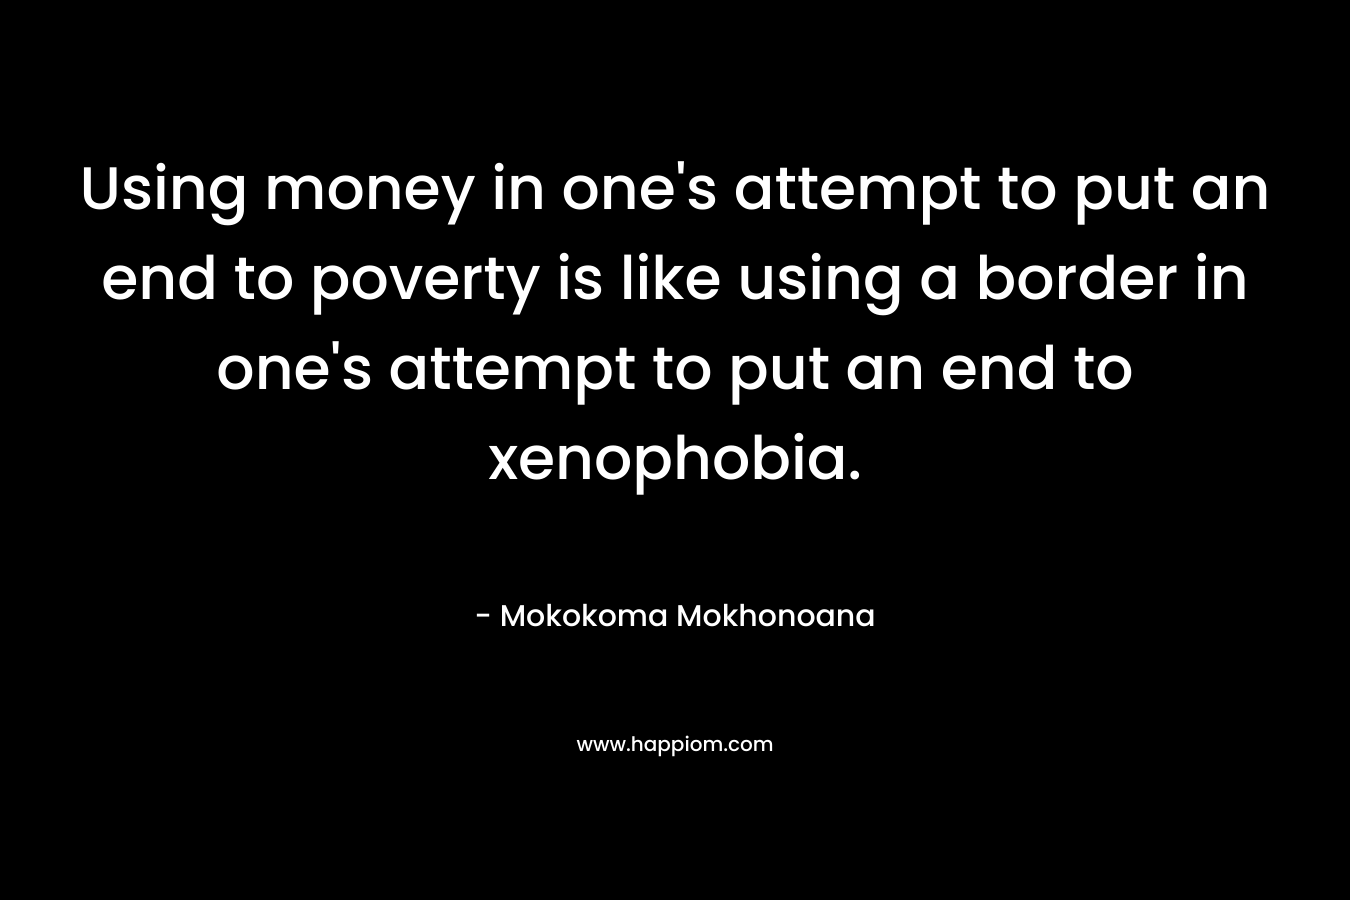 Using money in one’s attempt to put an end to poverty is like using a border in one’s attempt to put an end to xenophobia. – Mokokoma Mokhonoana